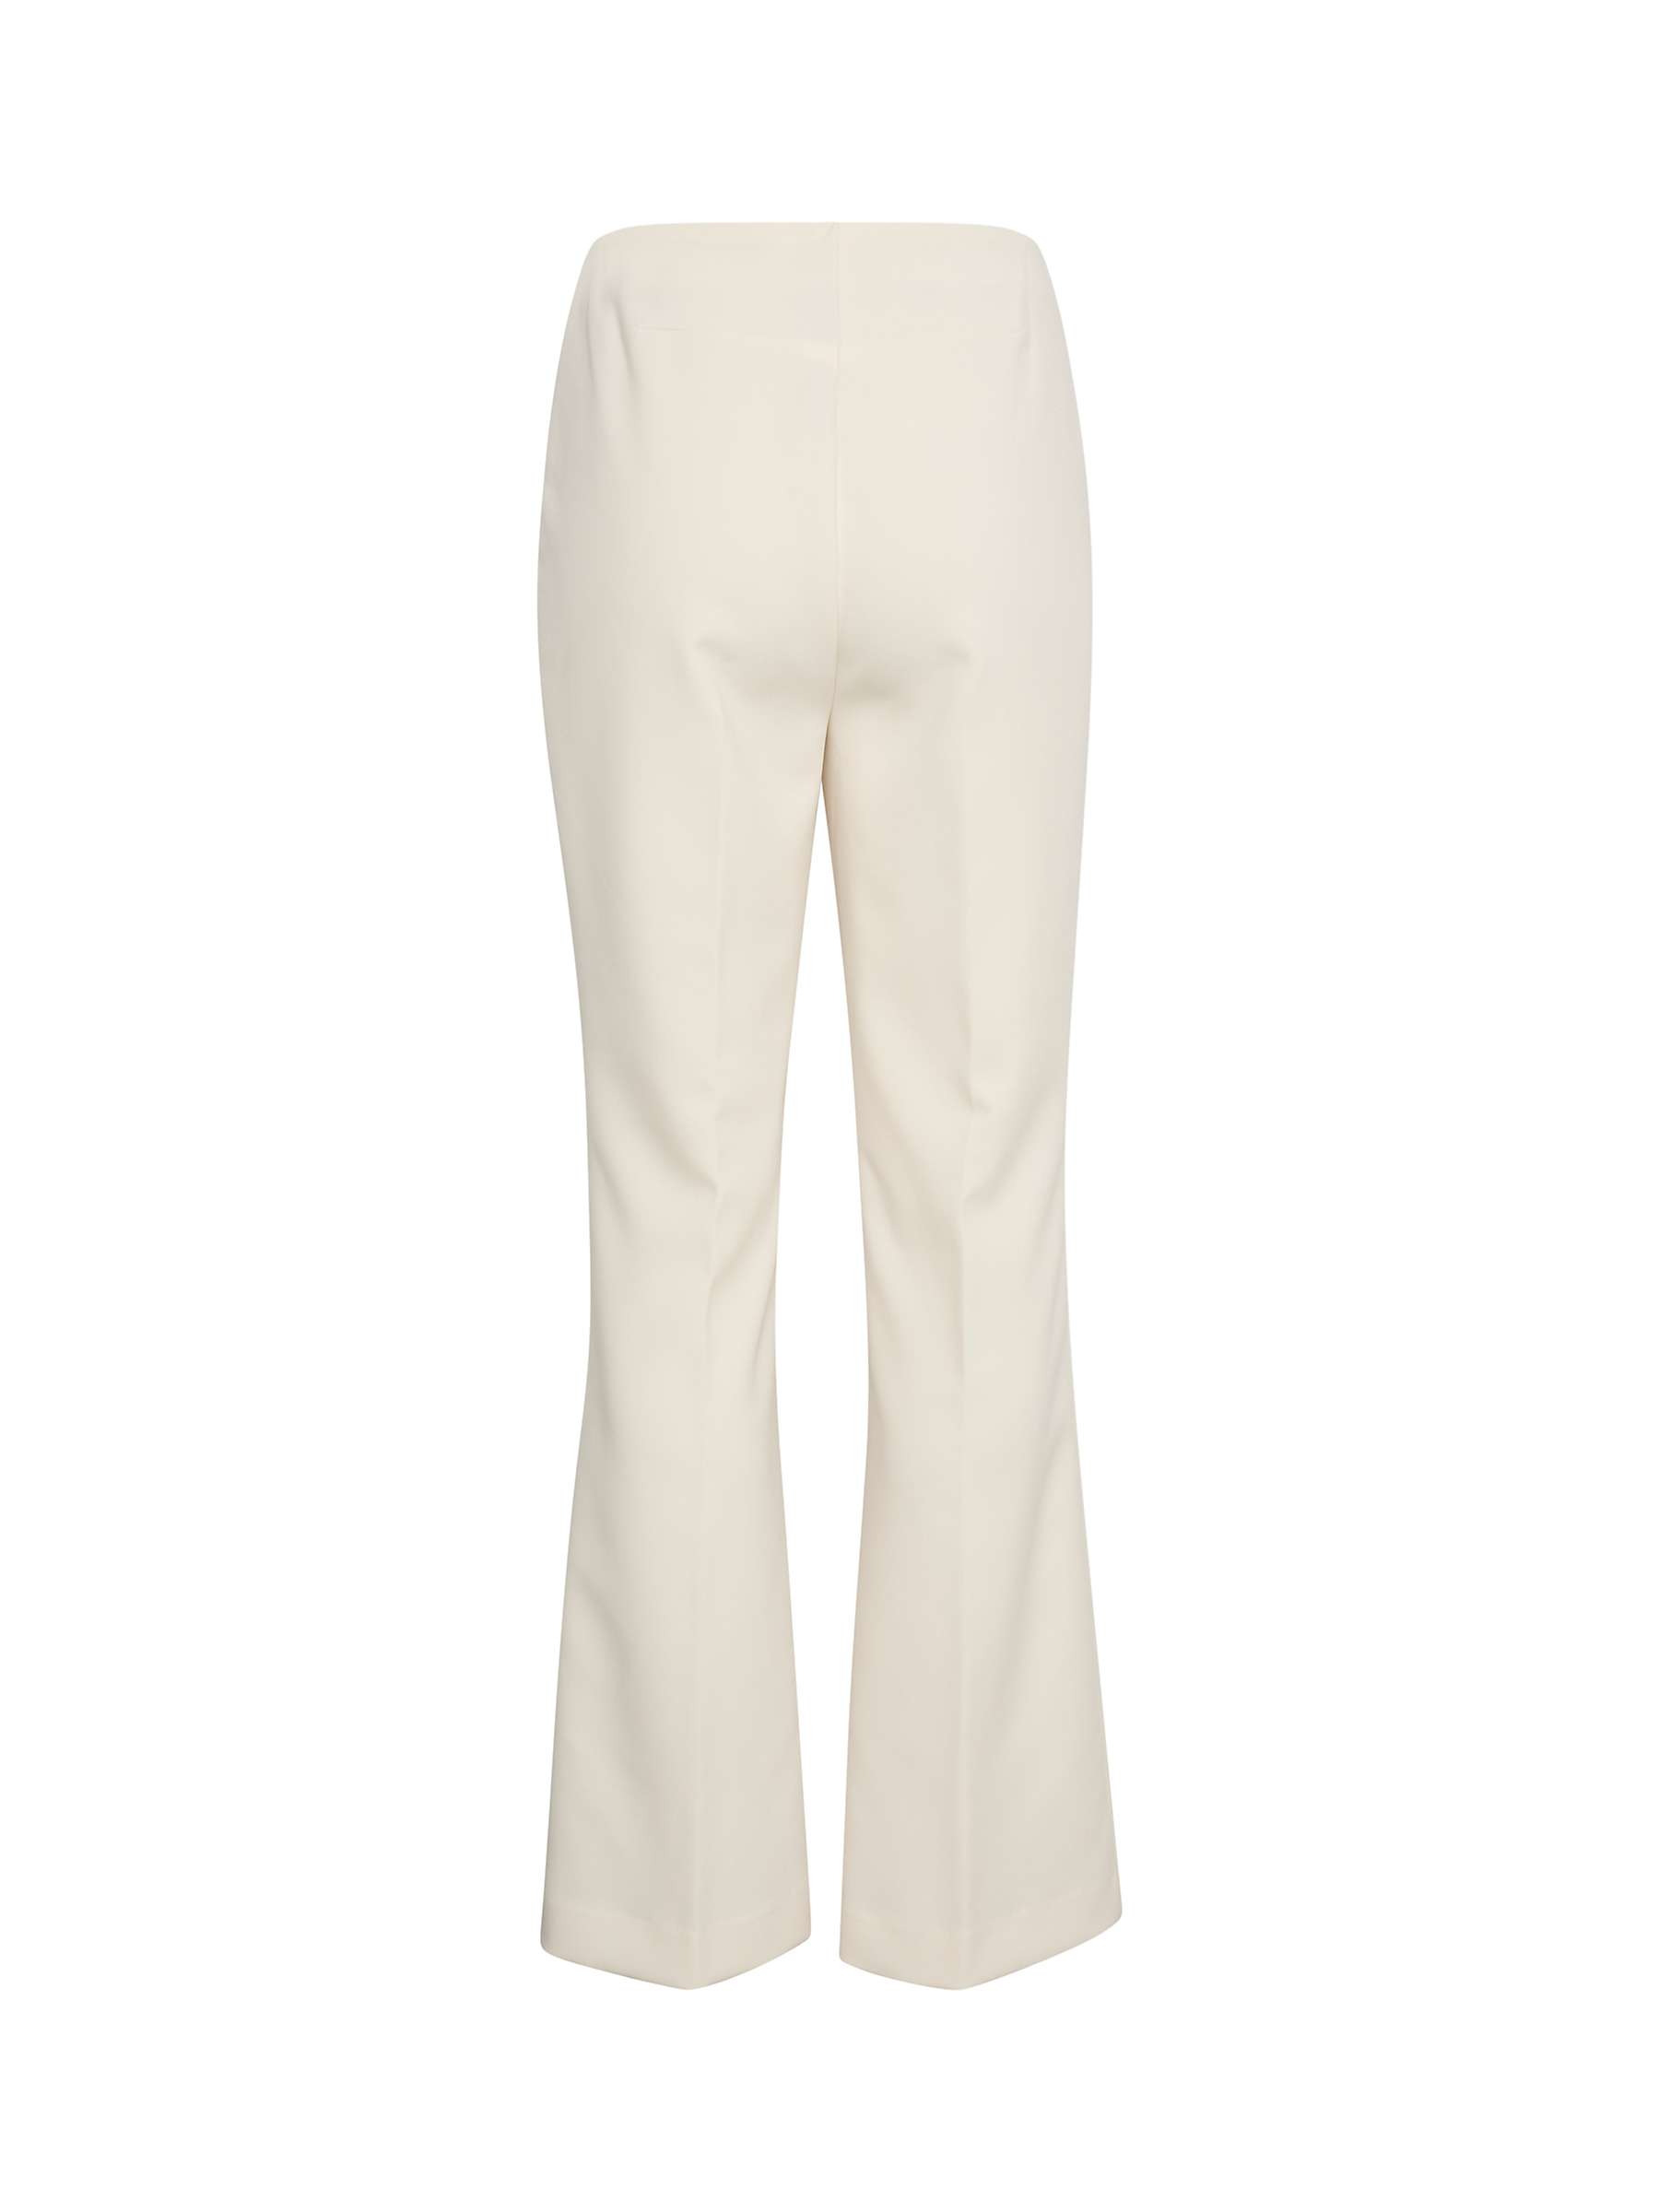 Buy Soaked In Luxury Corrine Stretch Trousers, Sandshell Online at johnlewis.com